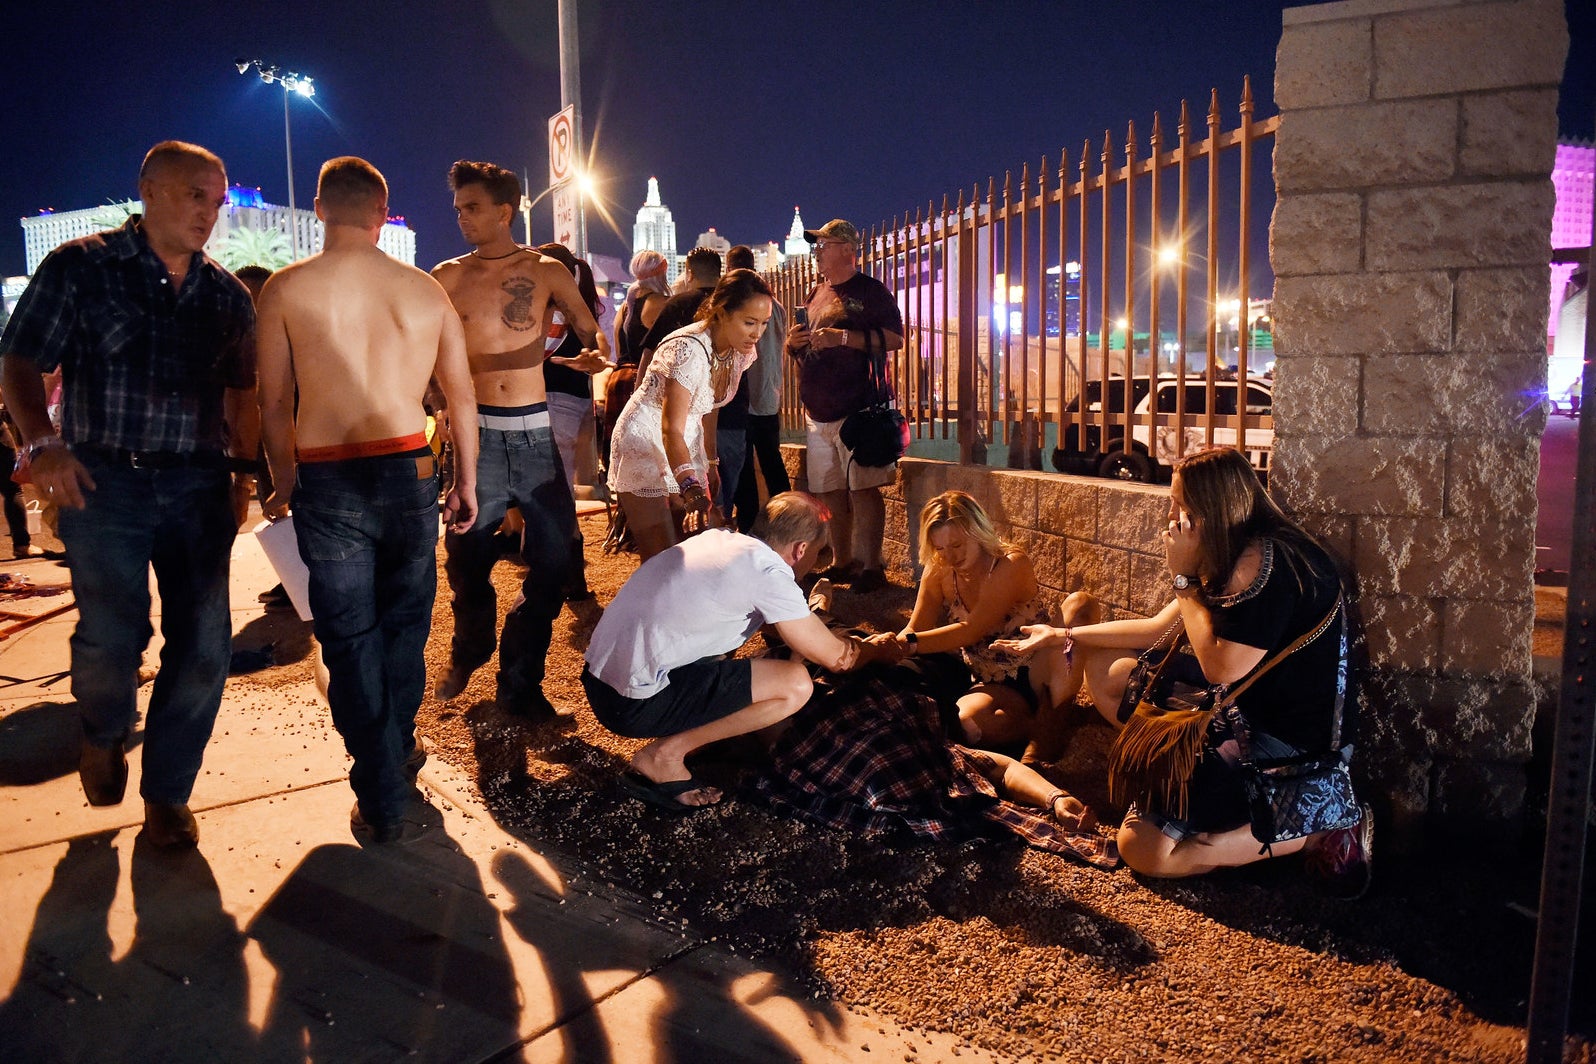 Photos Show The Terrifying Aftermath Of The Las Vegas Mass Shooting